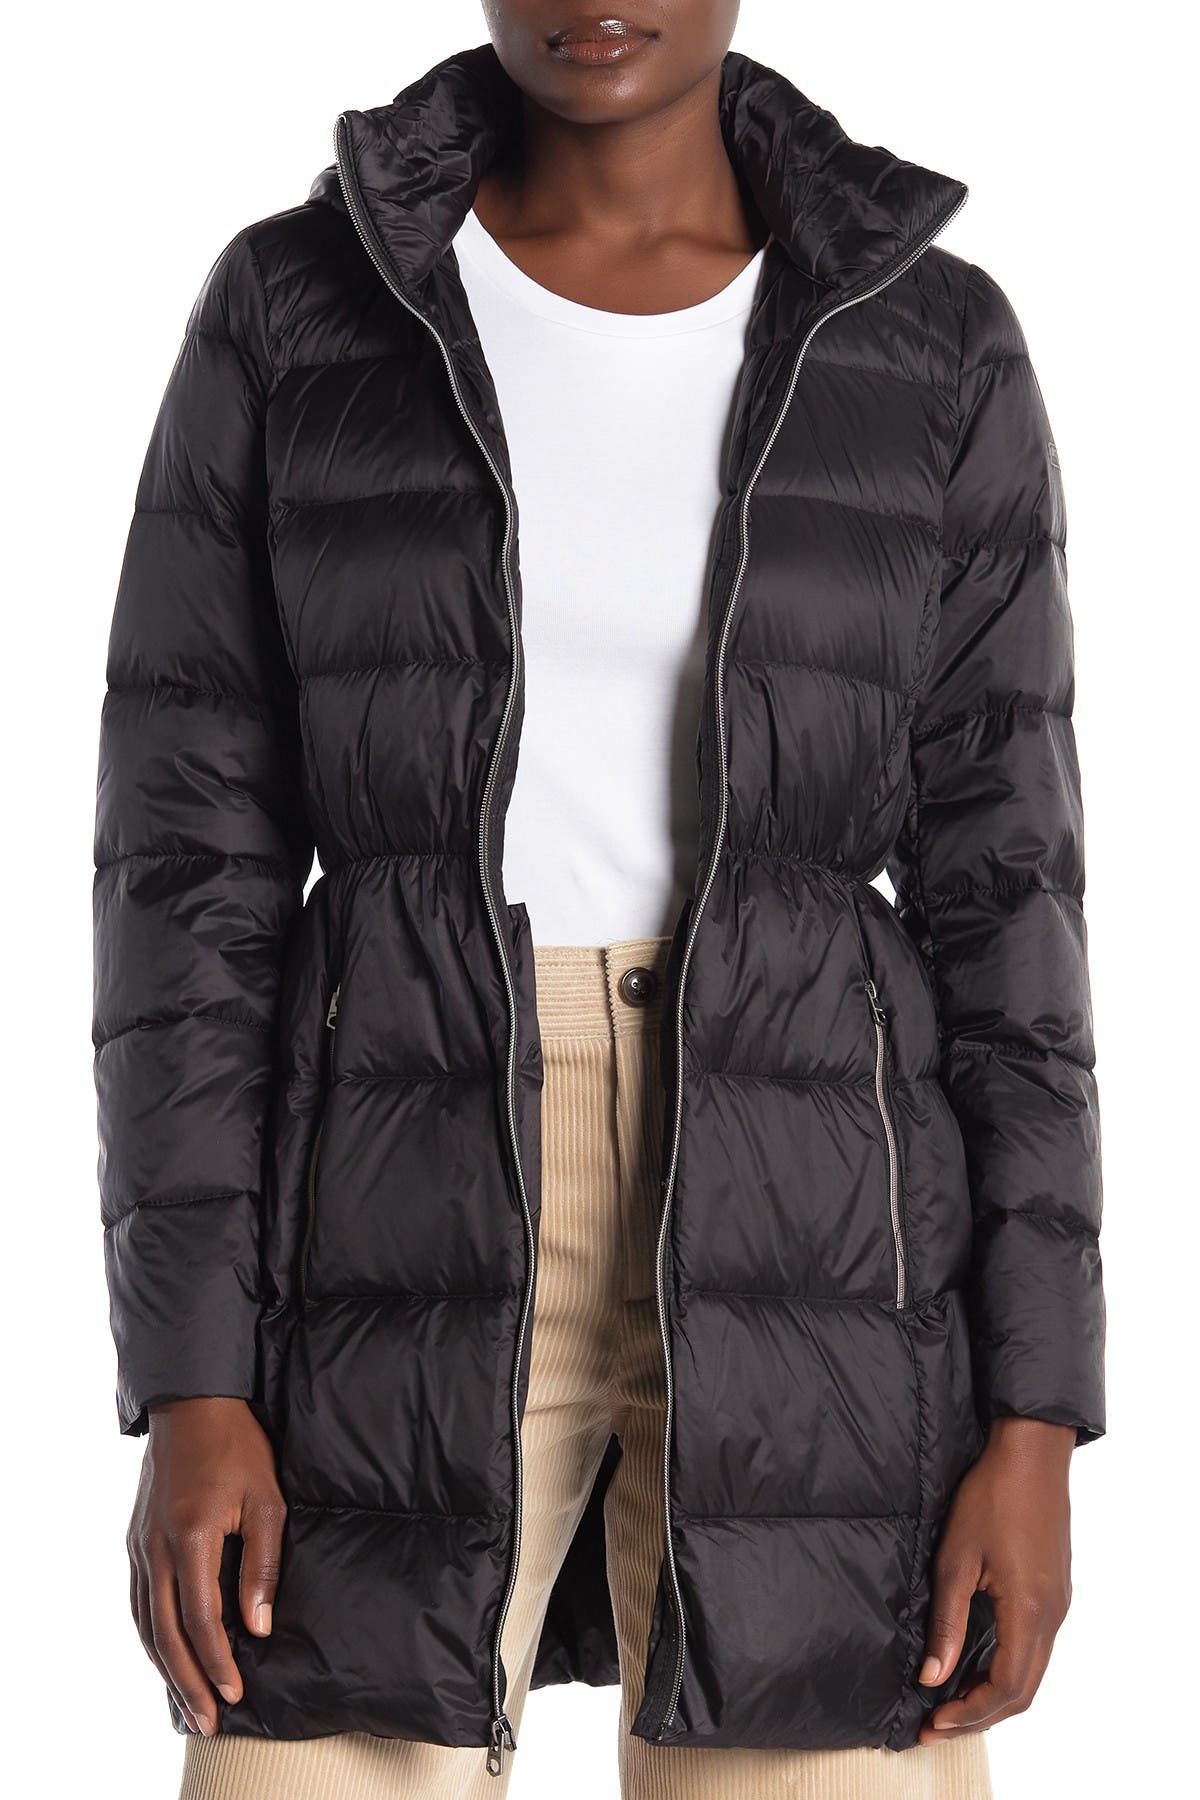 lucky brand packable jacket